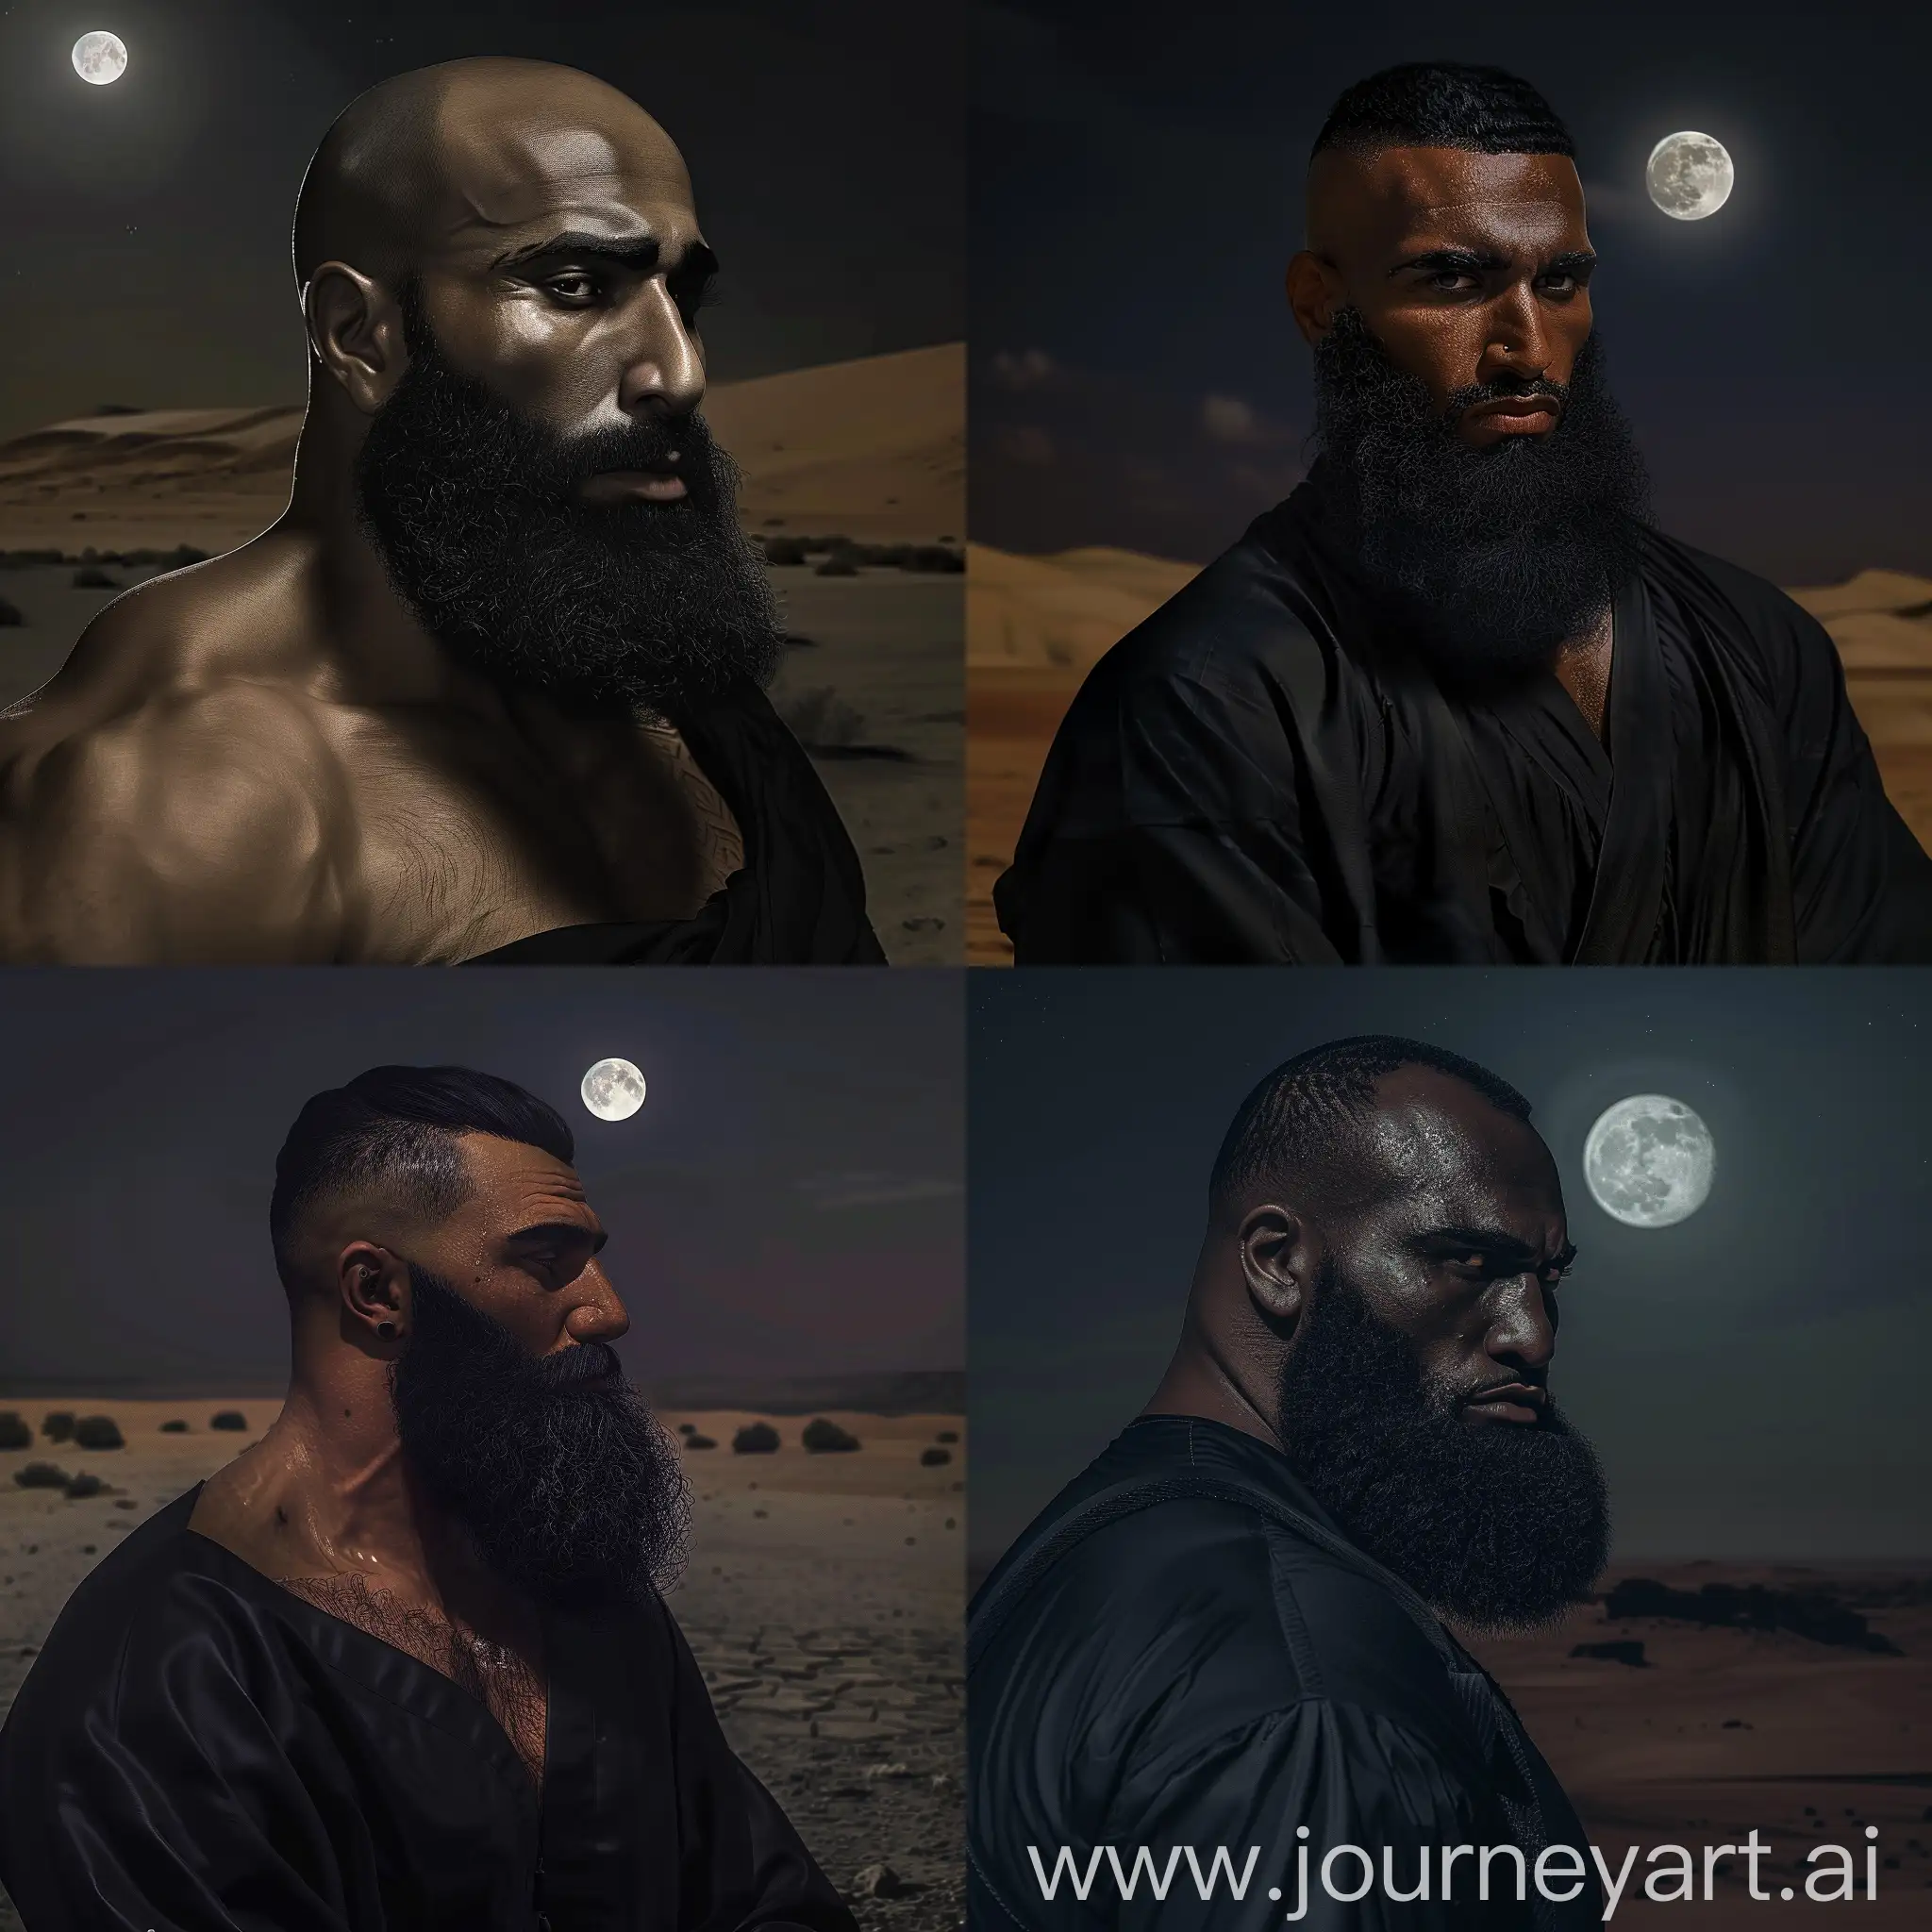 Strong-Bearded-Man-in-Black-Kufiya-Amidst-Desert-Night-with-Moon